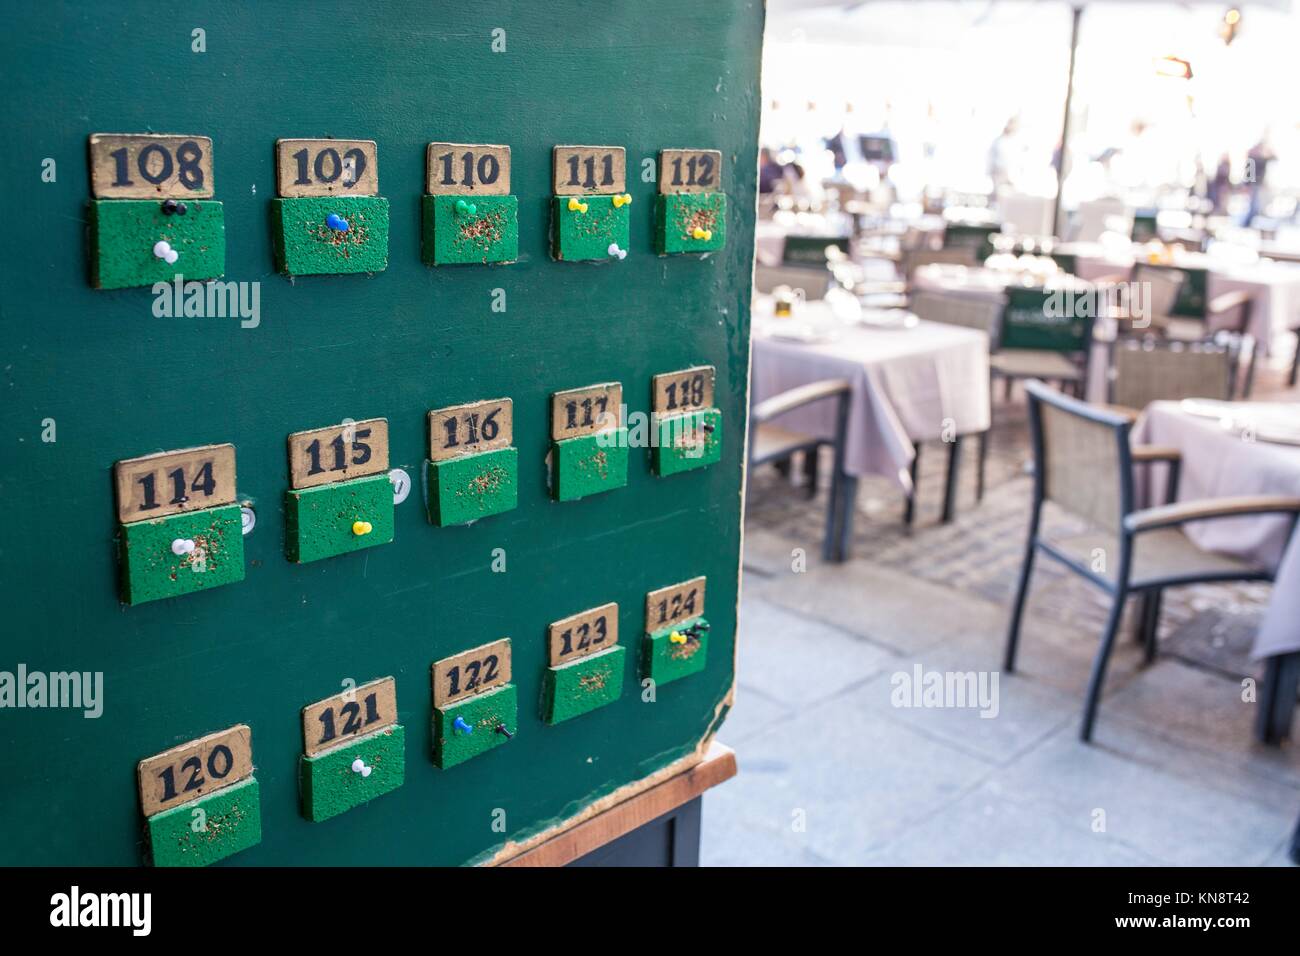 Green tabloid for tables orders at terrace restaurant, Spain. Stock Photo